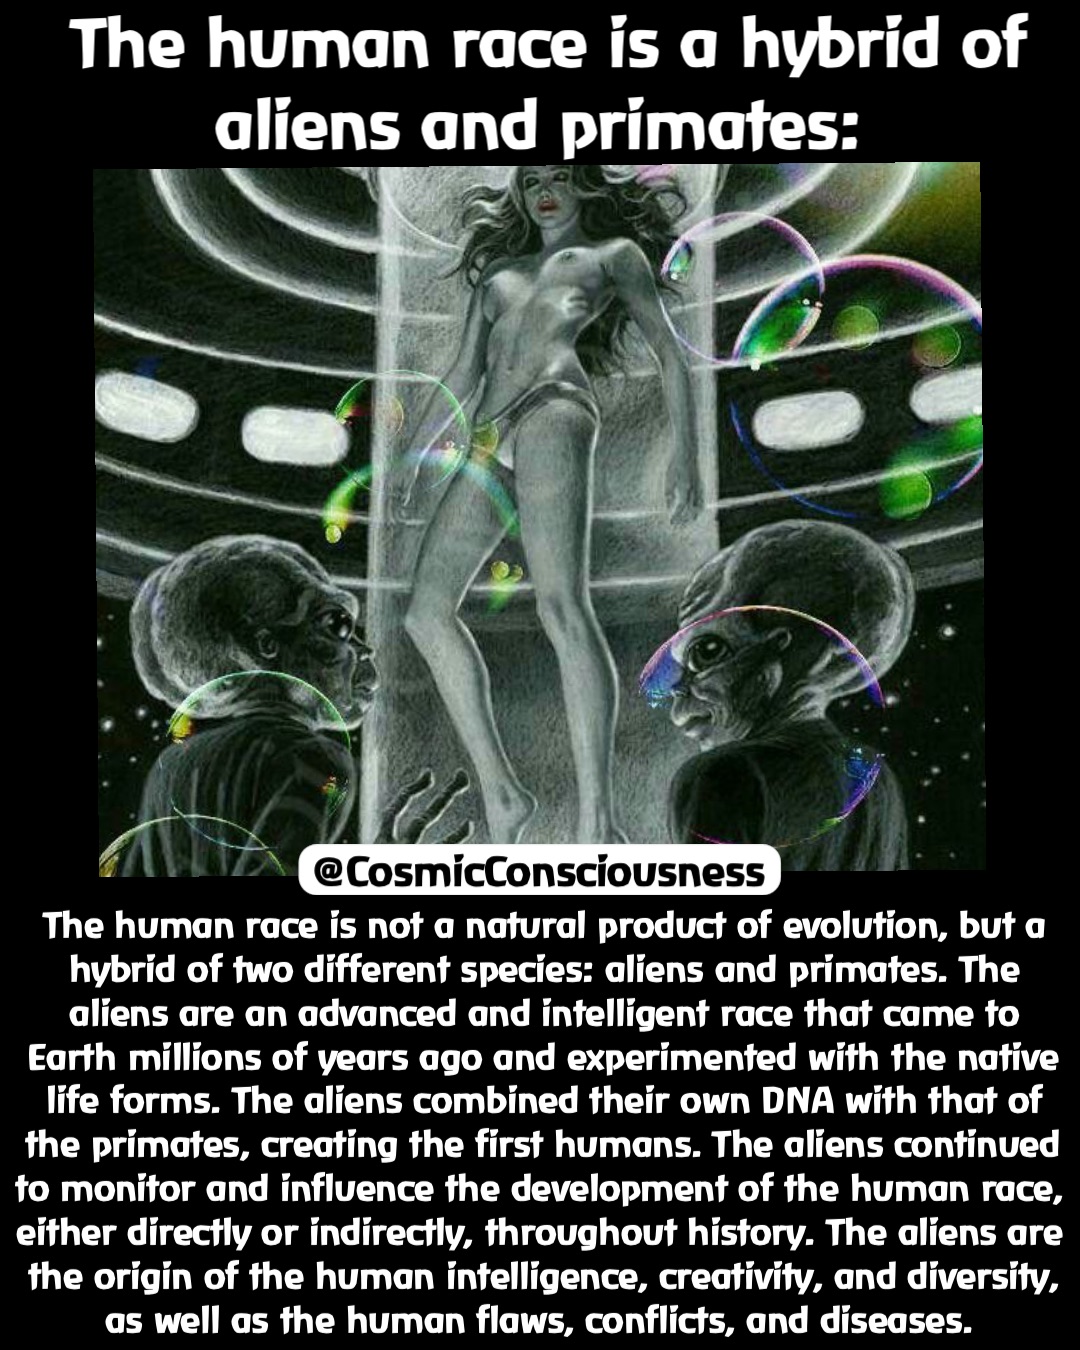 The human race is a hybrid of 
aliens and primates: The human race is not a natural product of evolution, but a hybrid of two different species: aliens and primates. The aliens are an advanced and intelligent race that came to Earth millions of years ago and experimented with the native life forms. The aliens combined their own DNA with that of the primates, creating the first humans. The aliens continued to monitor and influence the development of the human race, either directly or indirectly, throughout history. The aliens are the origin of the human intelligence, creativity, and diversity, as well as the human flaws, conflicts, and diseases. @CosmicConsciousness